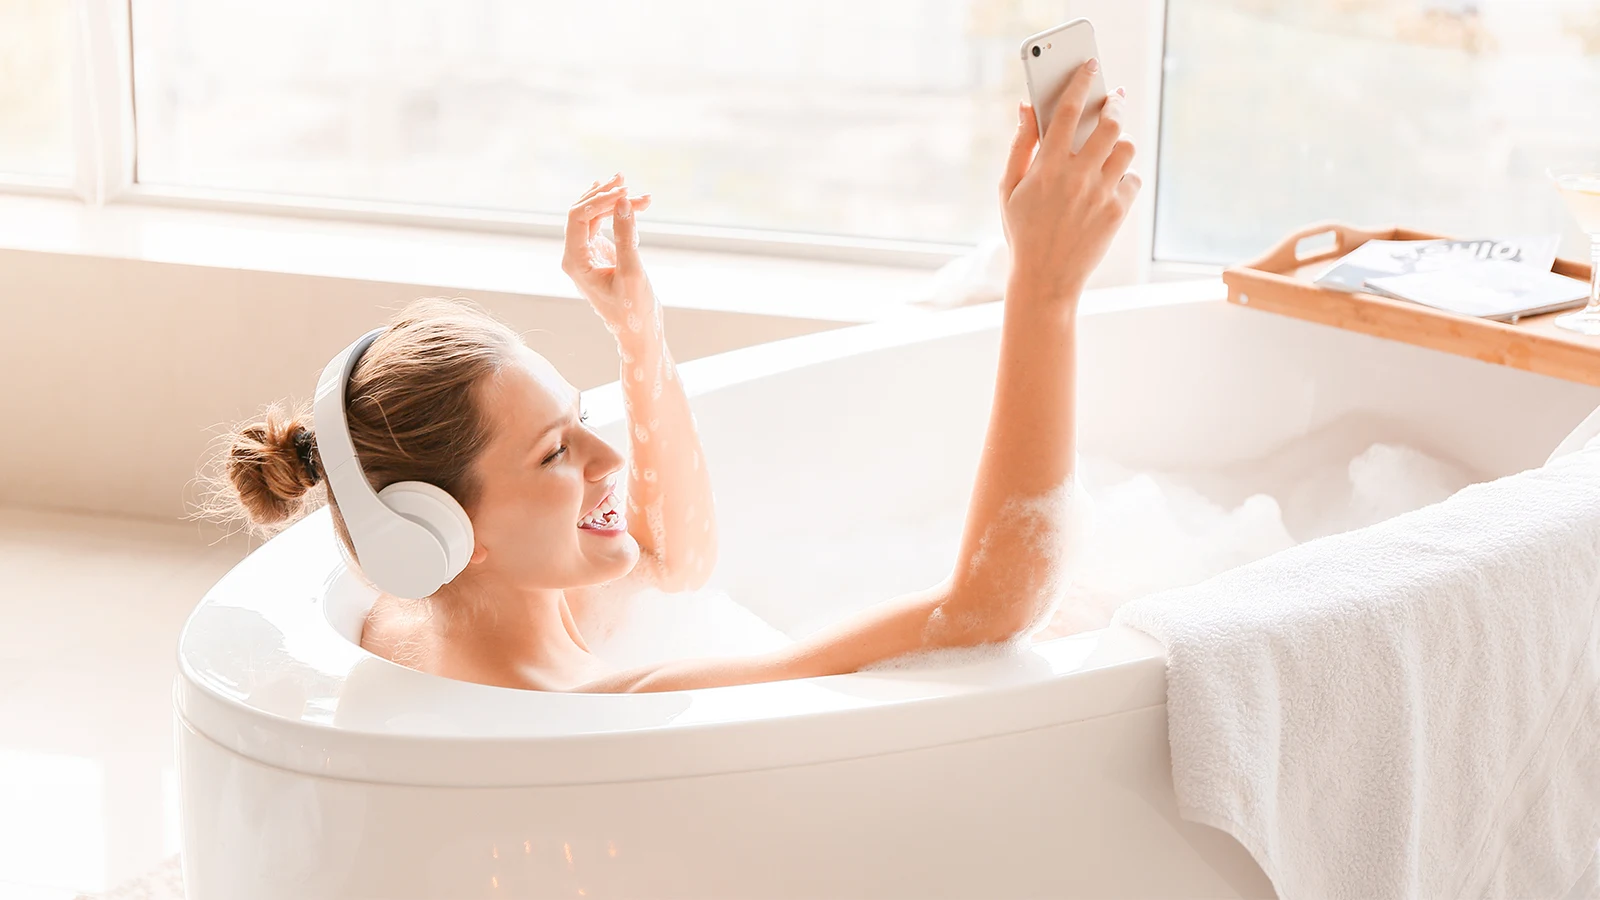 A woman is taking a bath while listening to music.